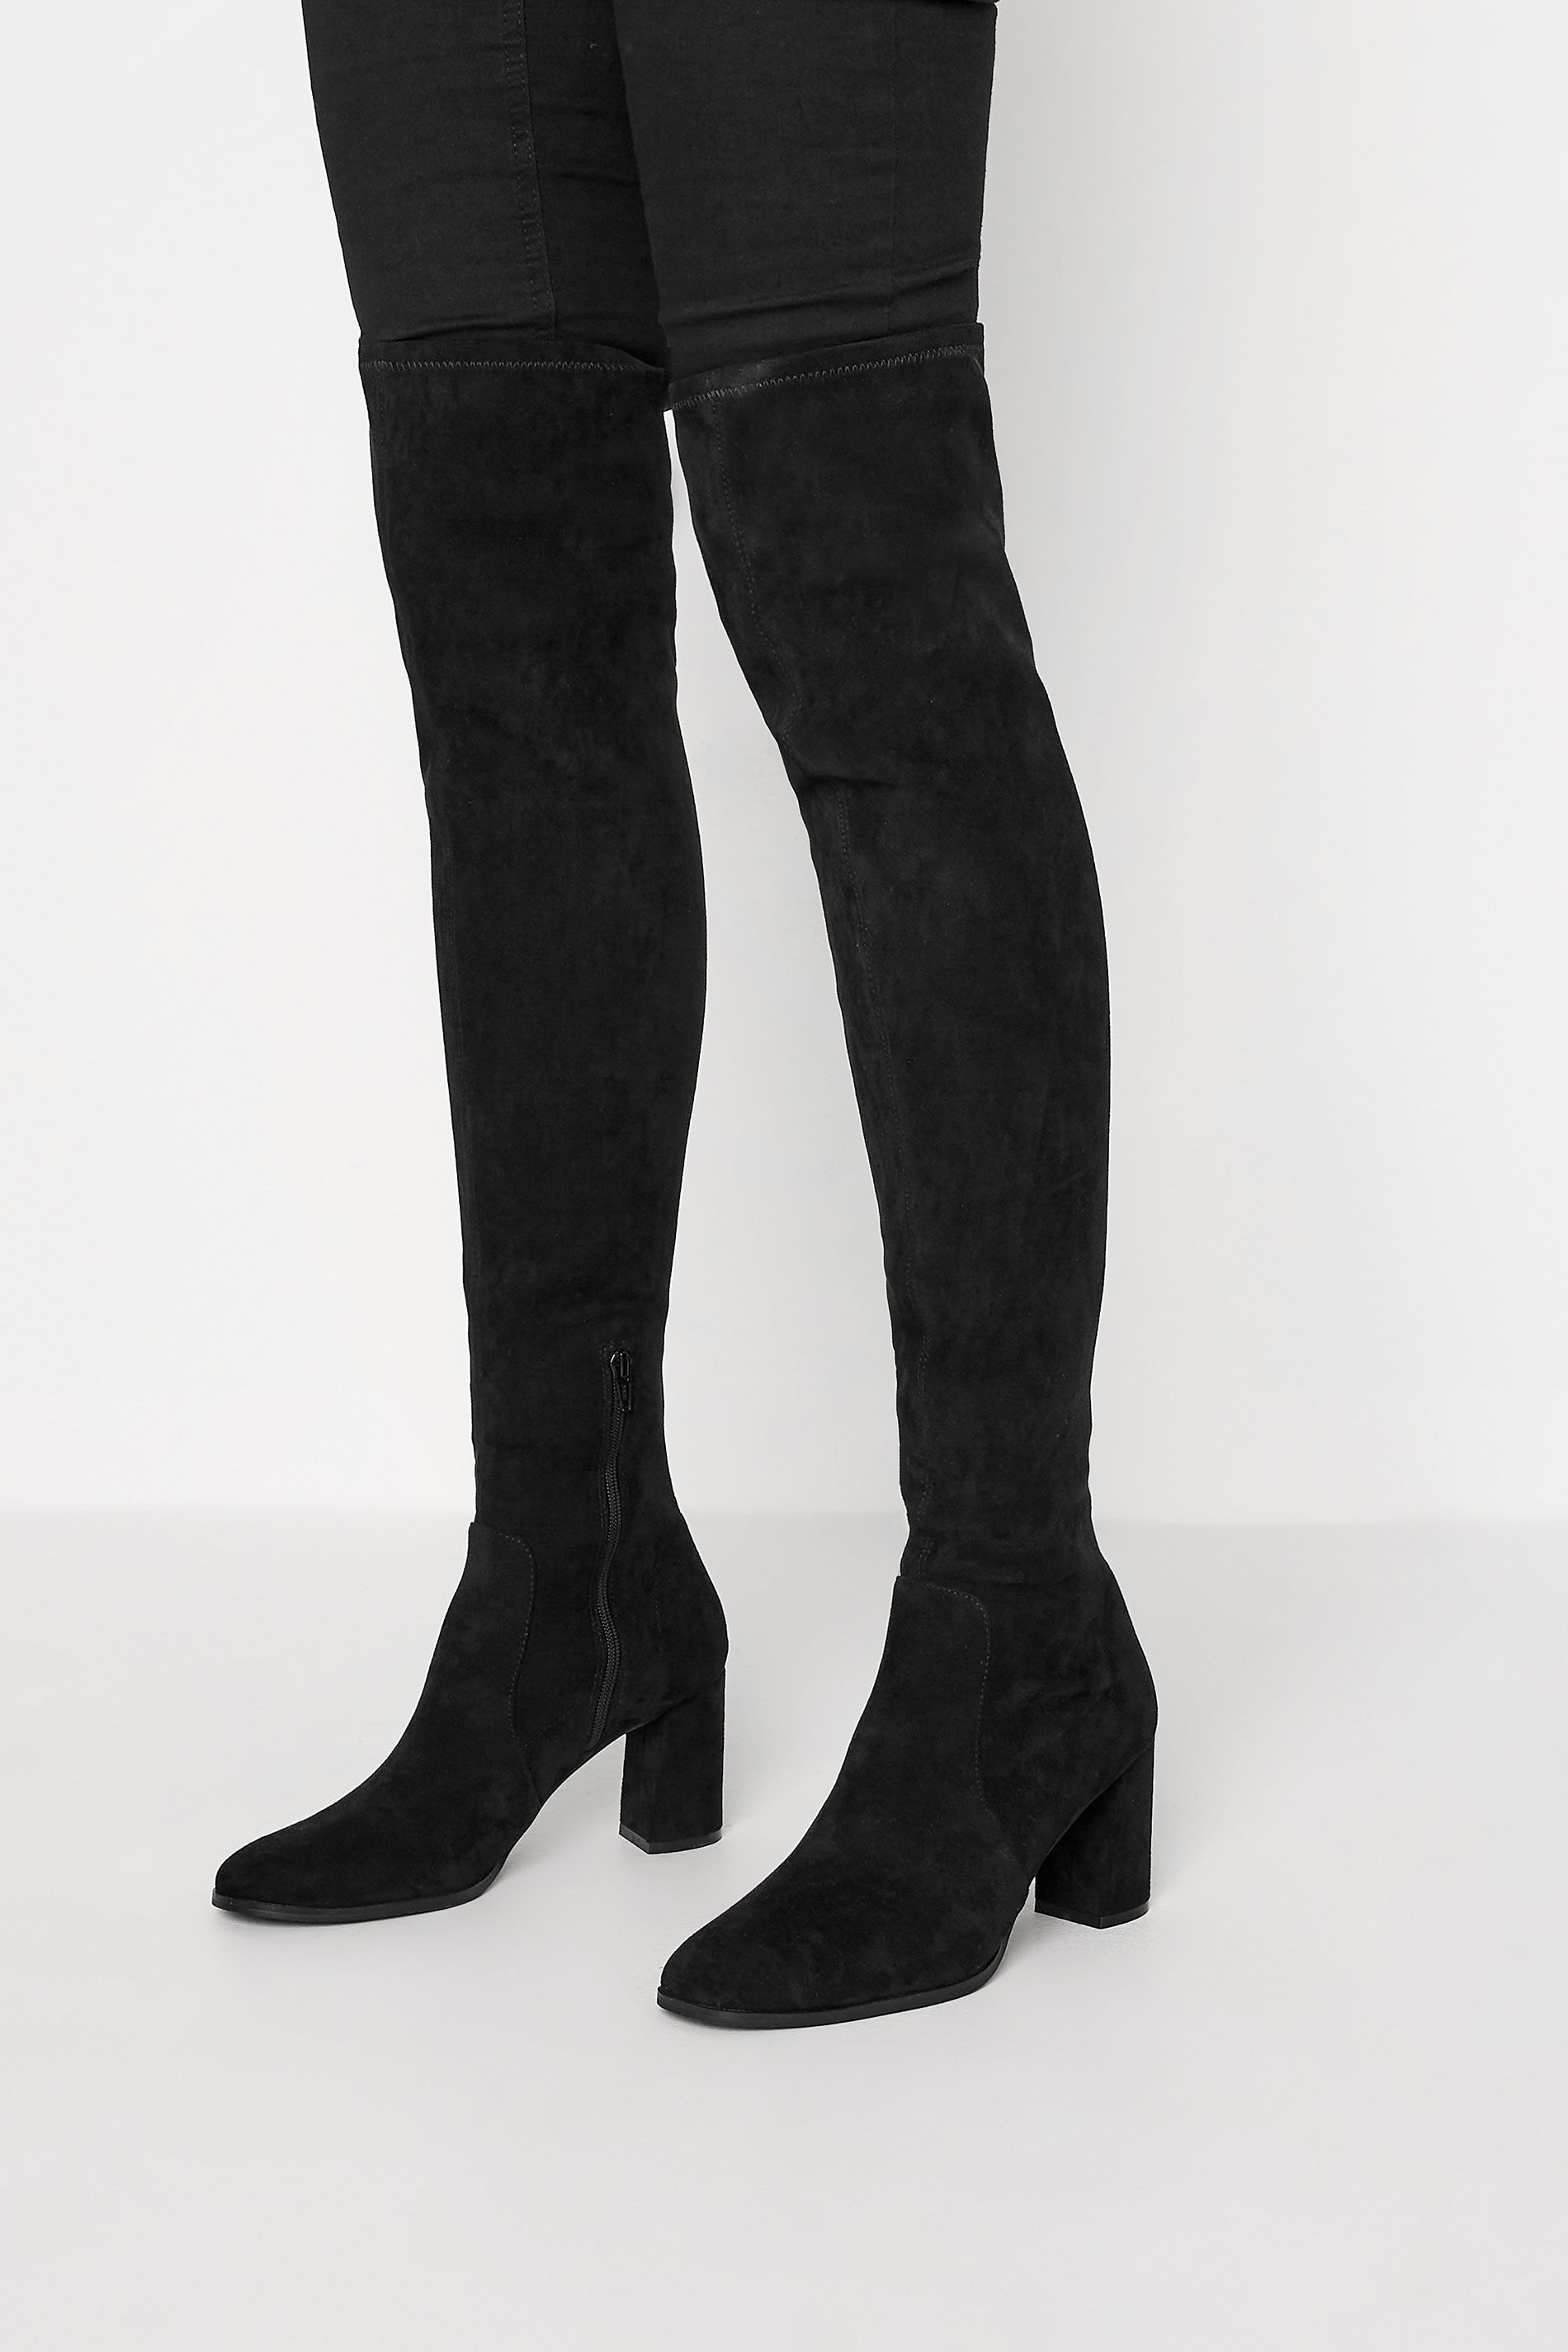 LTS Black Suede Heeled Over The Knee Boots In Standard D Fit | Long Tall Sally